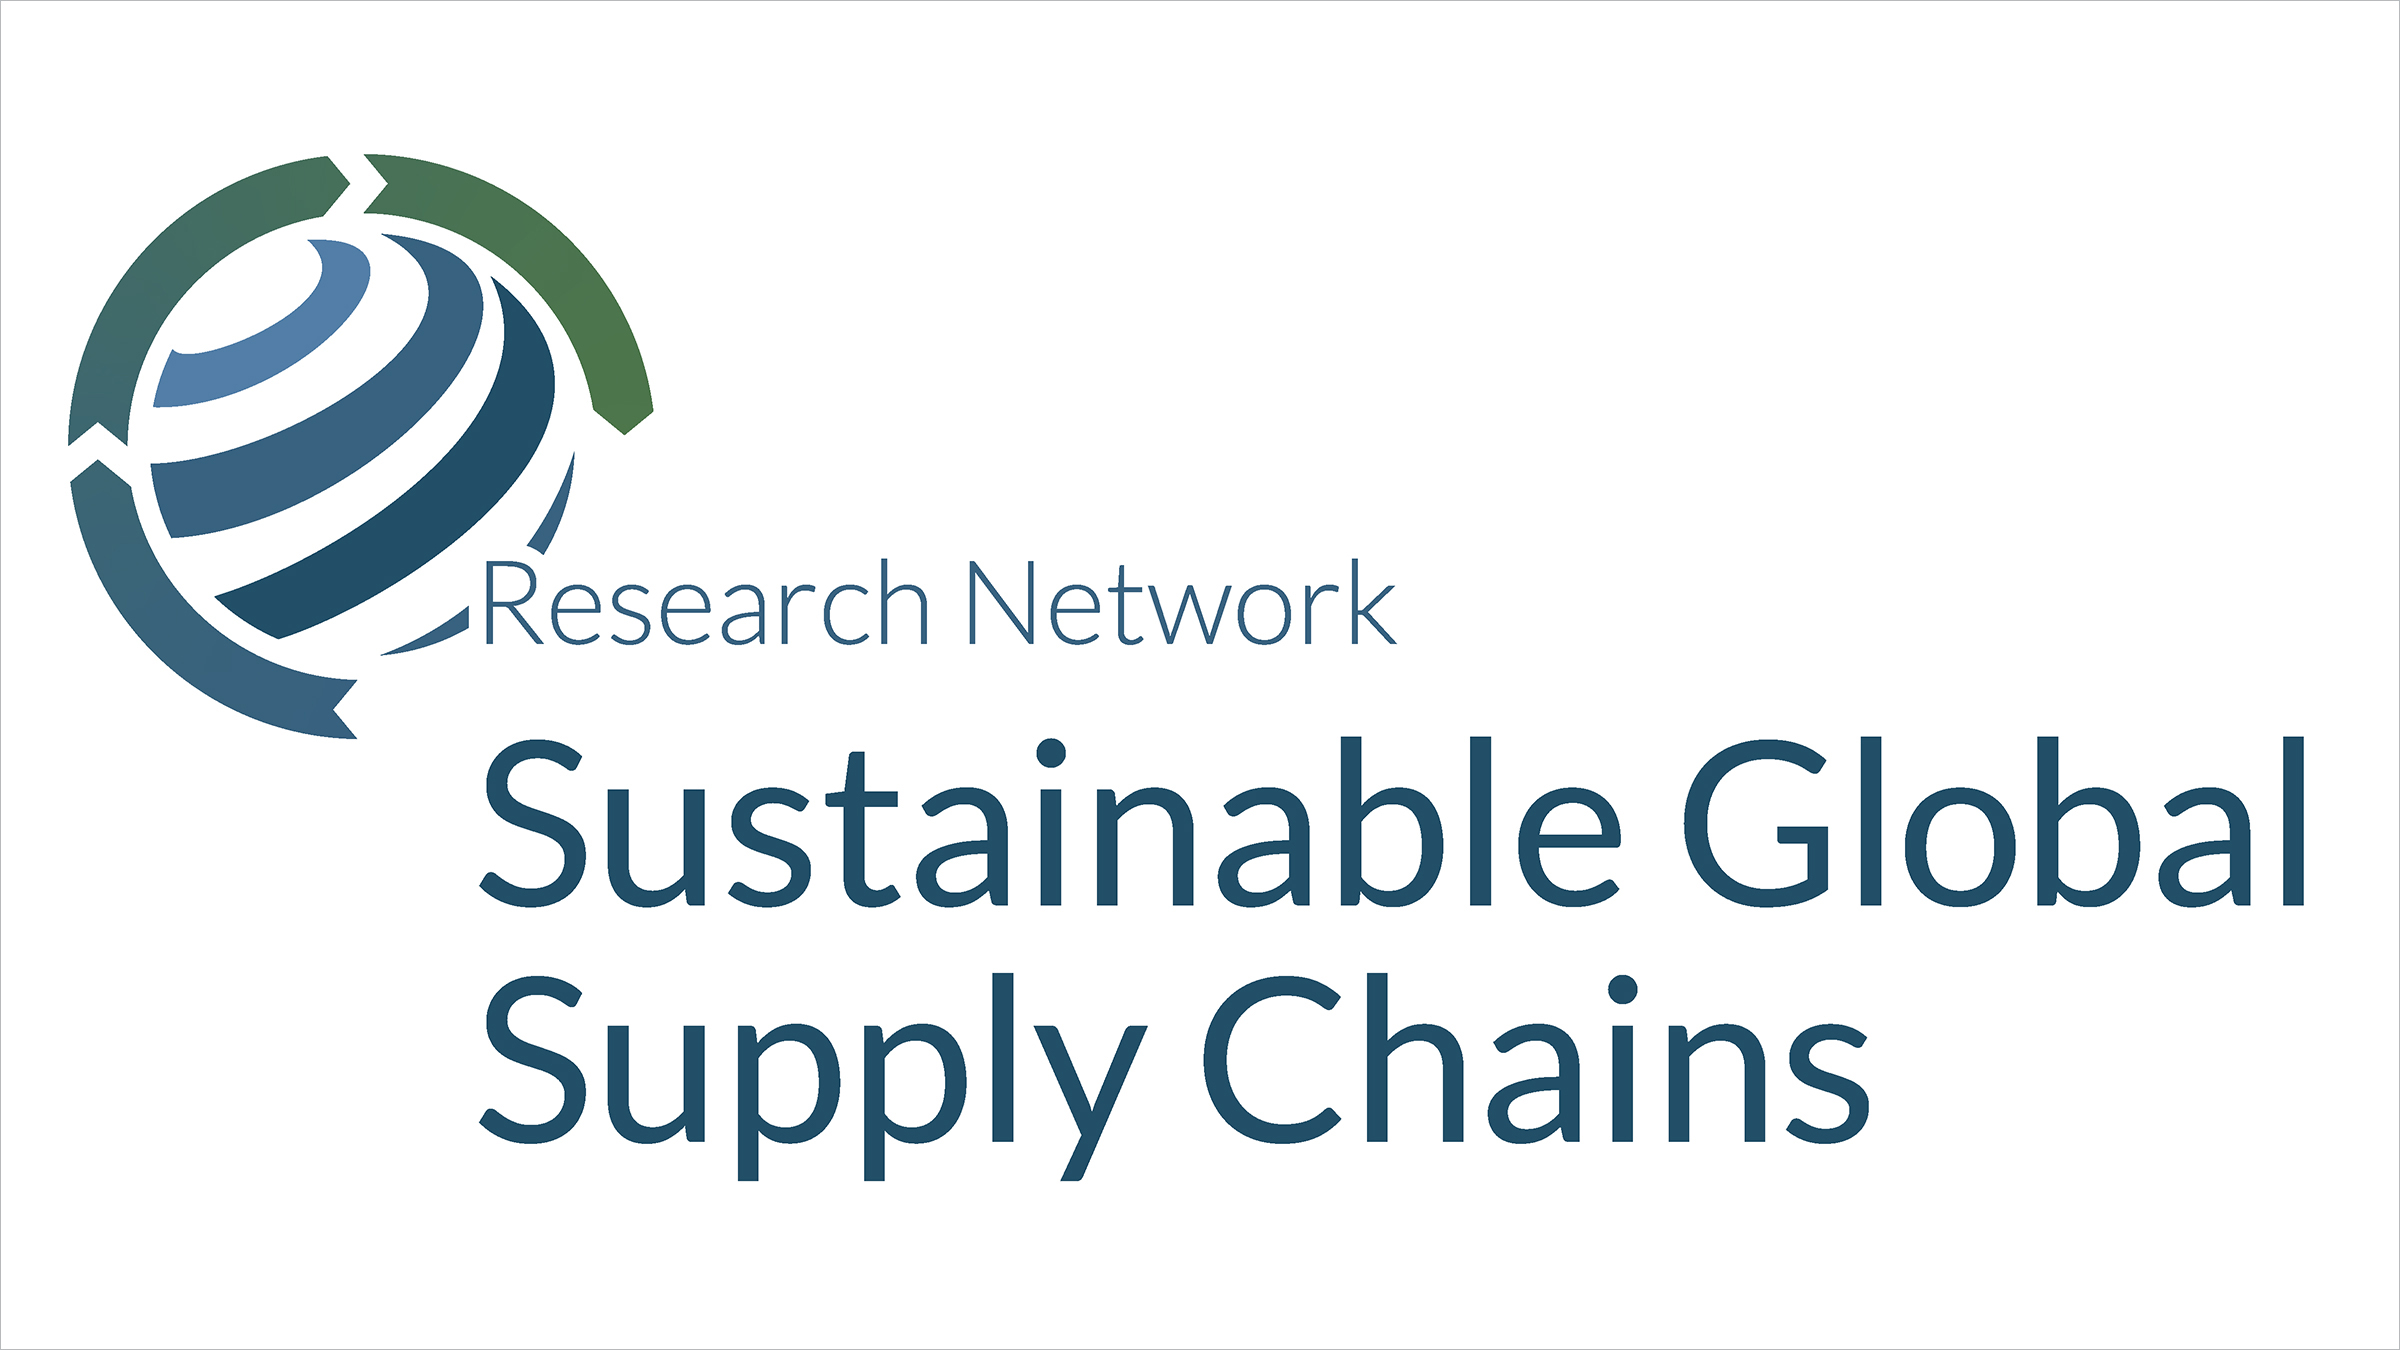 Call for Papers: the Economics and Governance of Sustainability in Global Value Chains